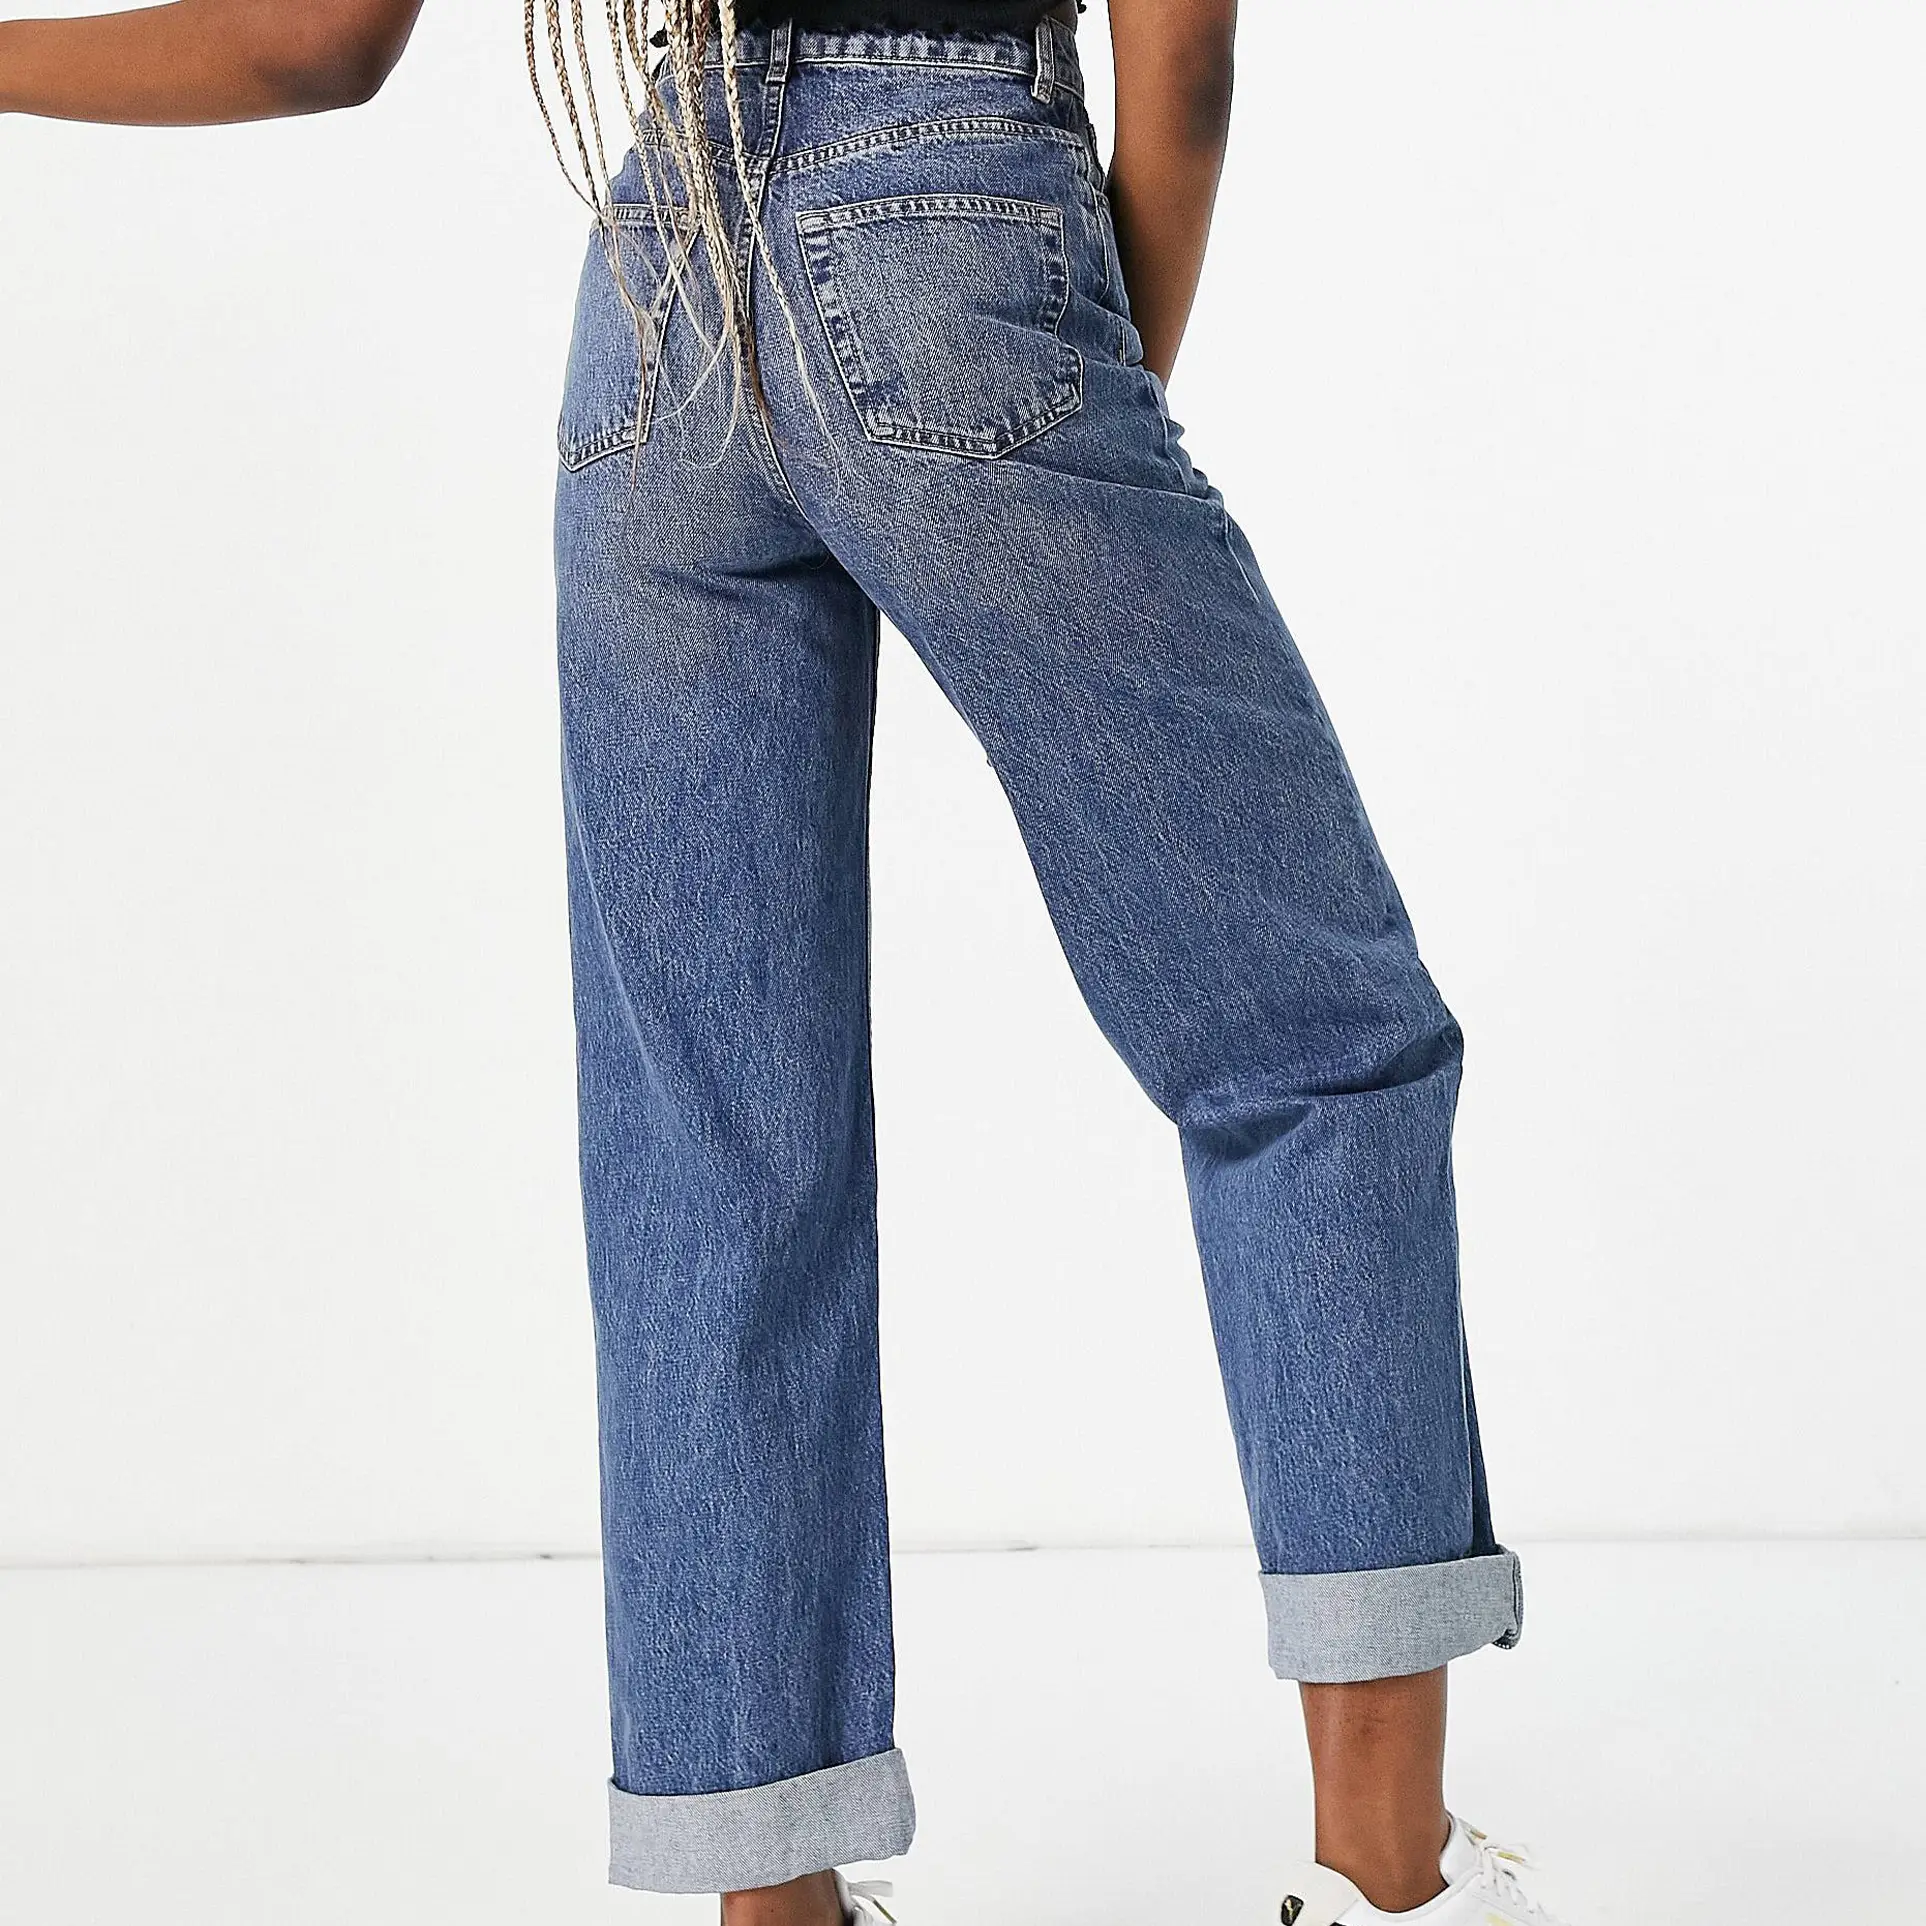 The Best Jeans For Tall Women | The Sole Supplier